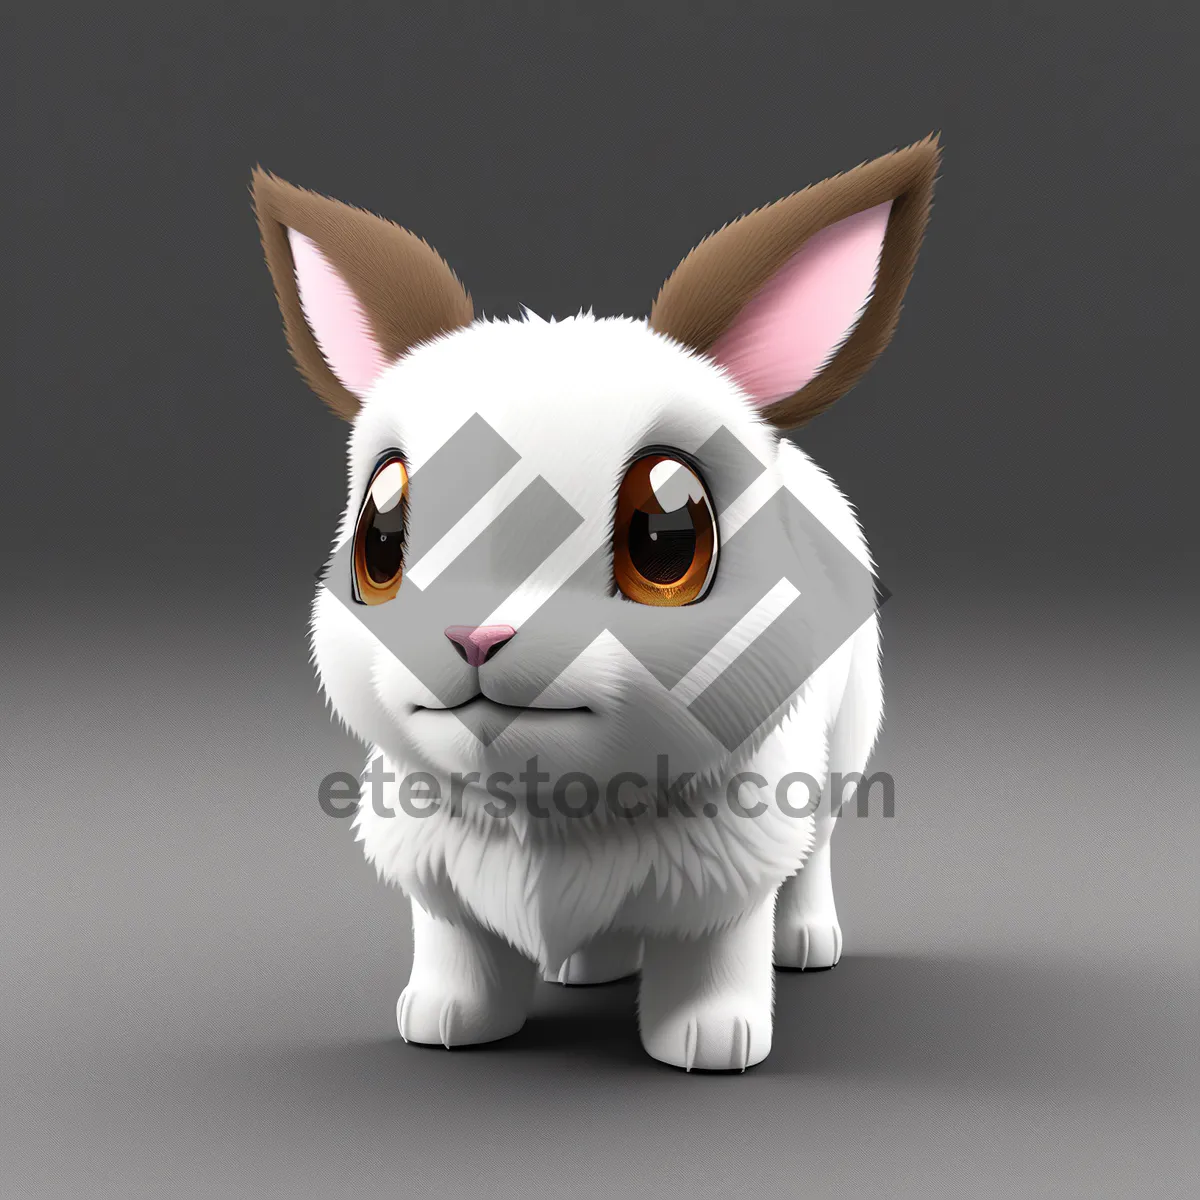 Picture of Cute Bunny Piggy Bank with Ears, Savings, and Money